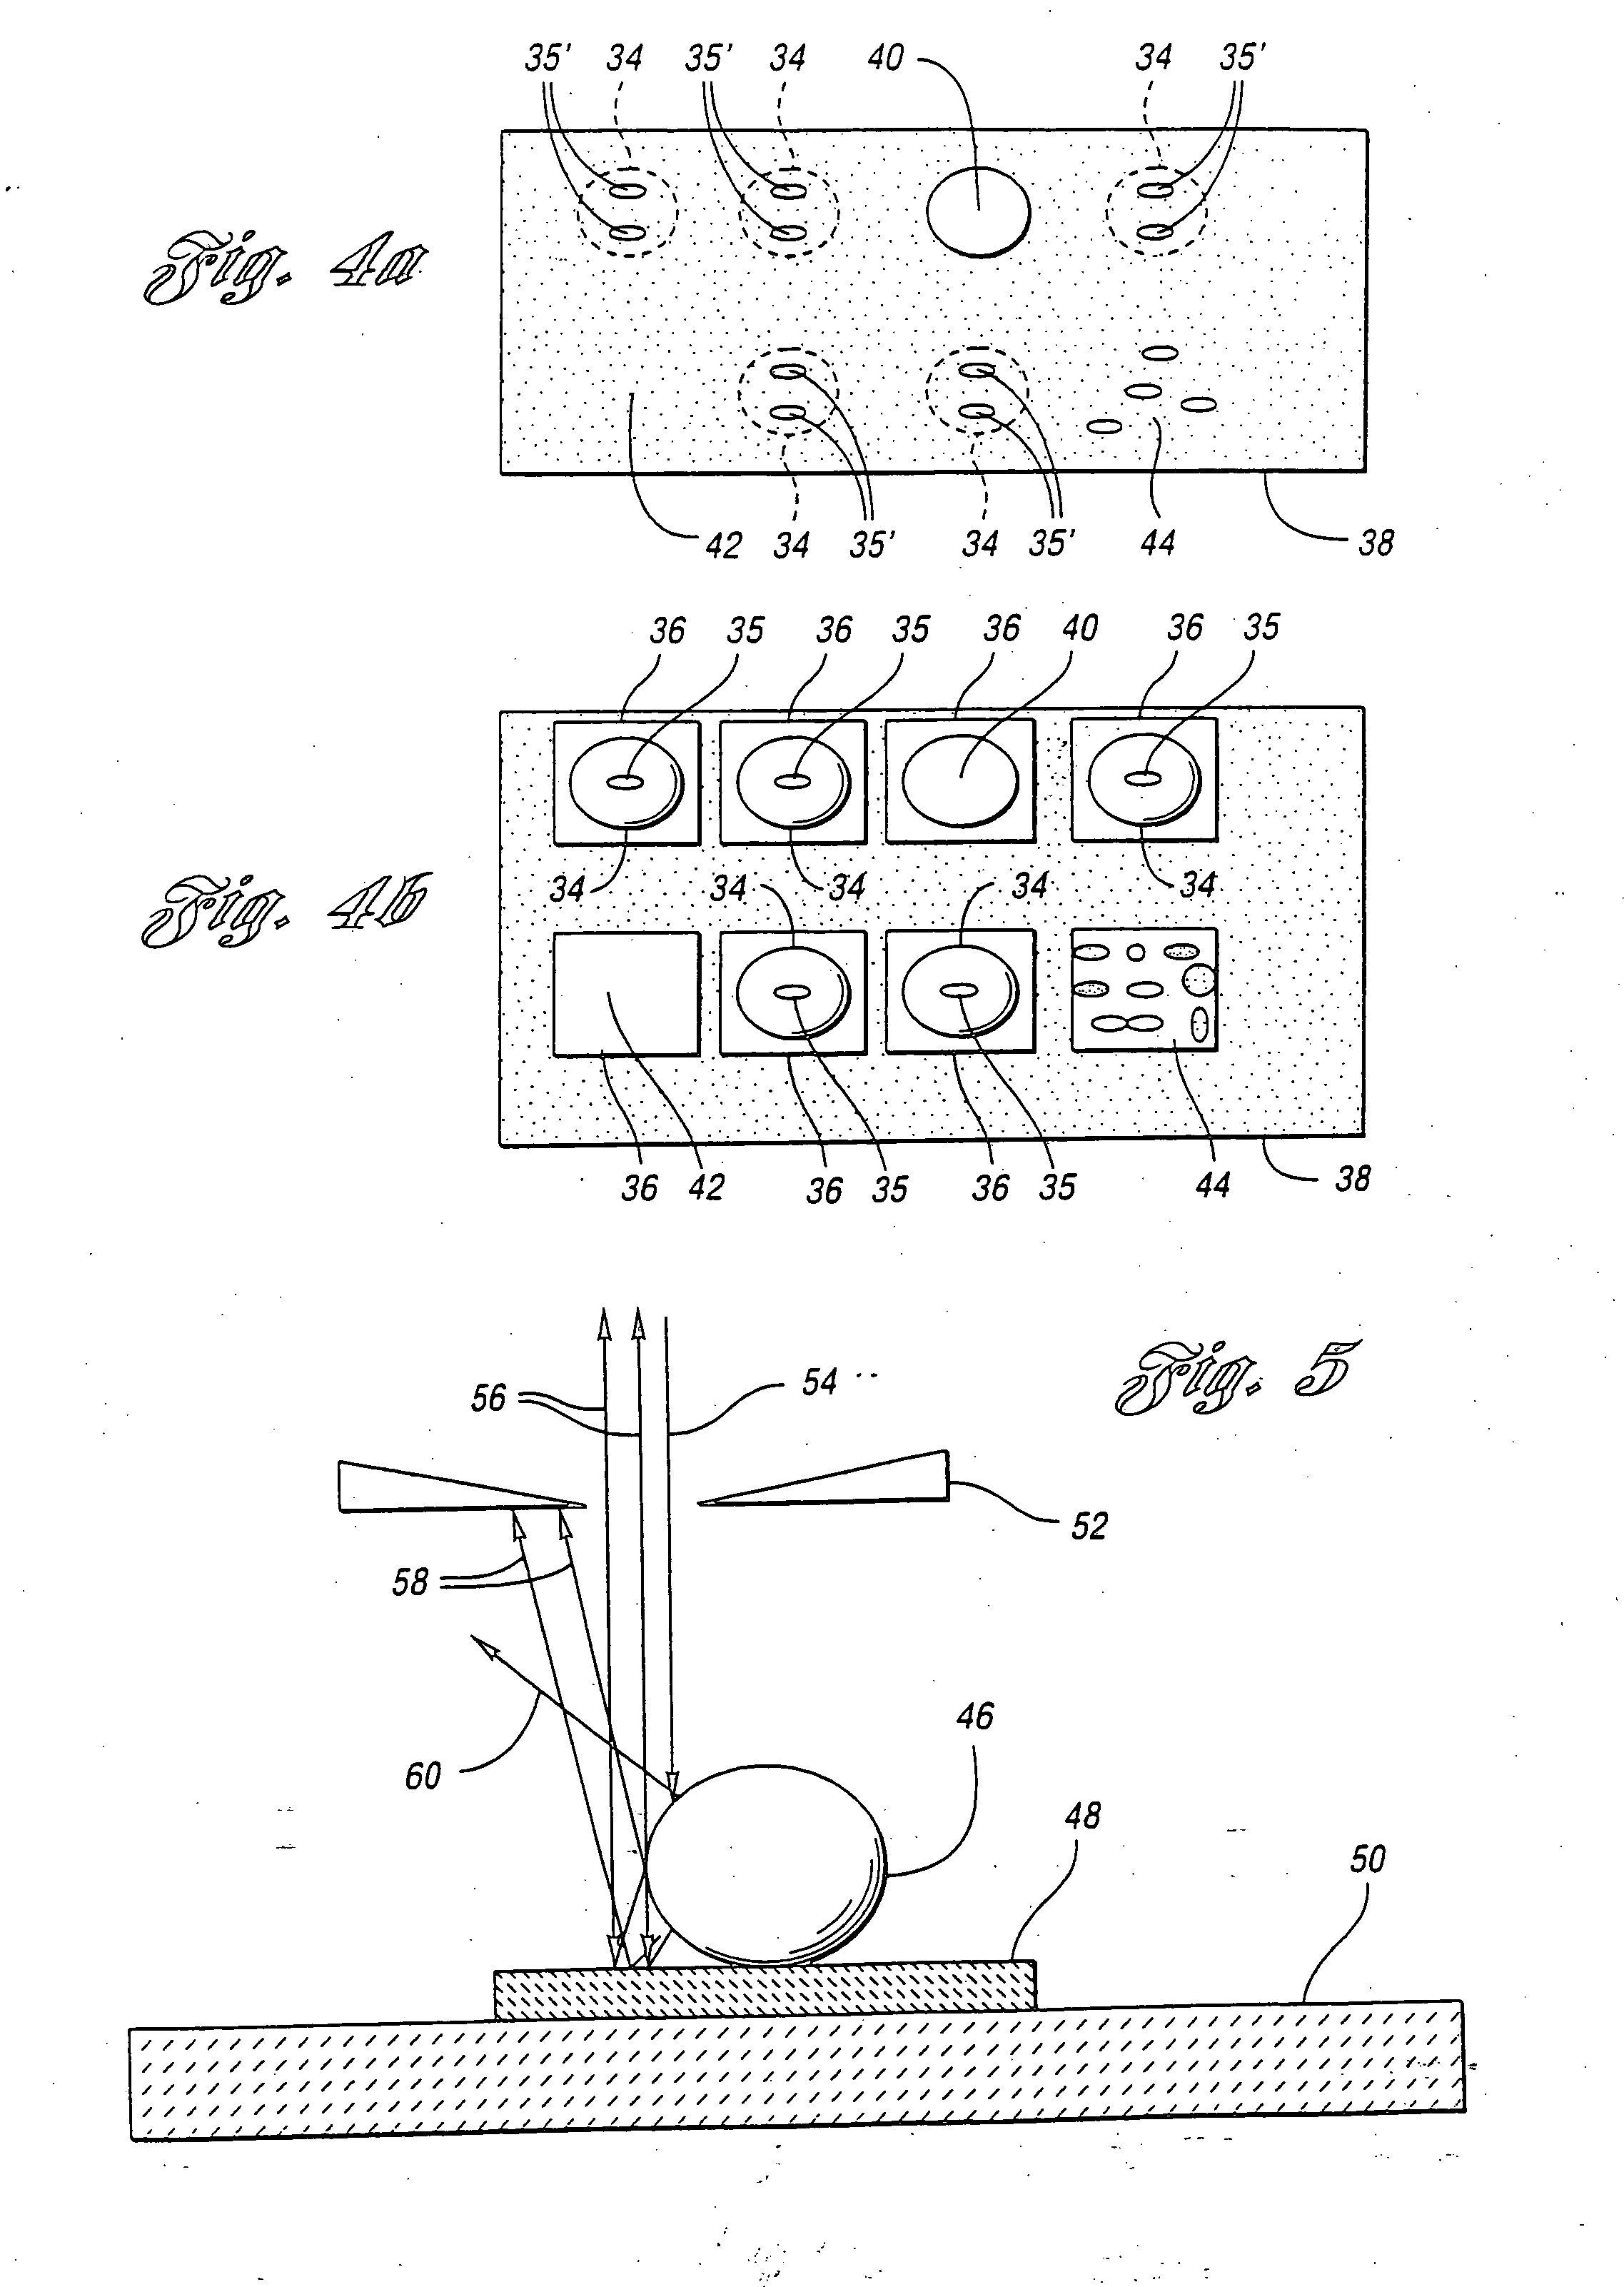 Method and system for high speed measuring of microscopic targets